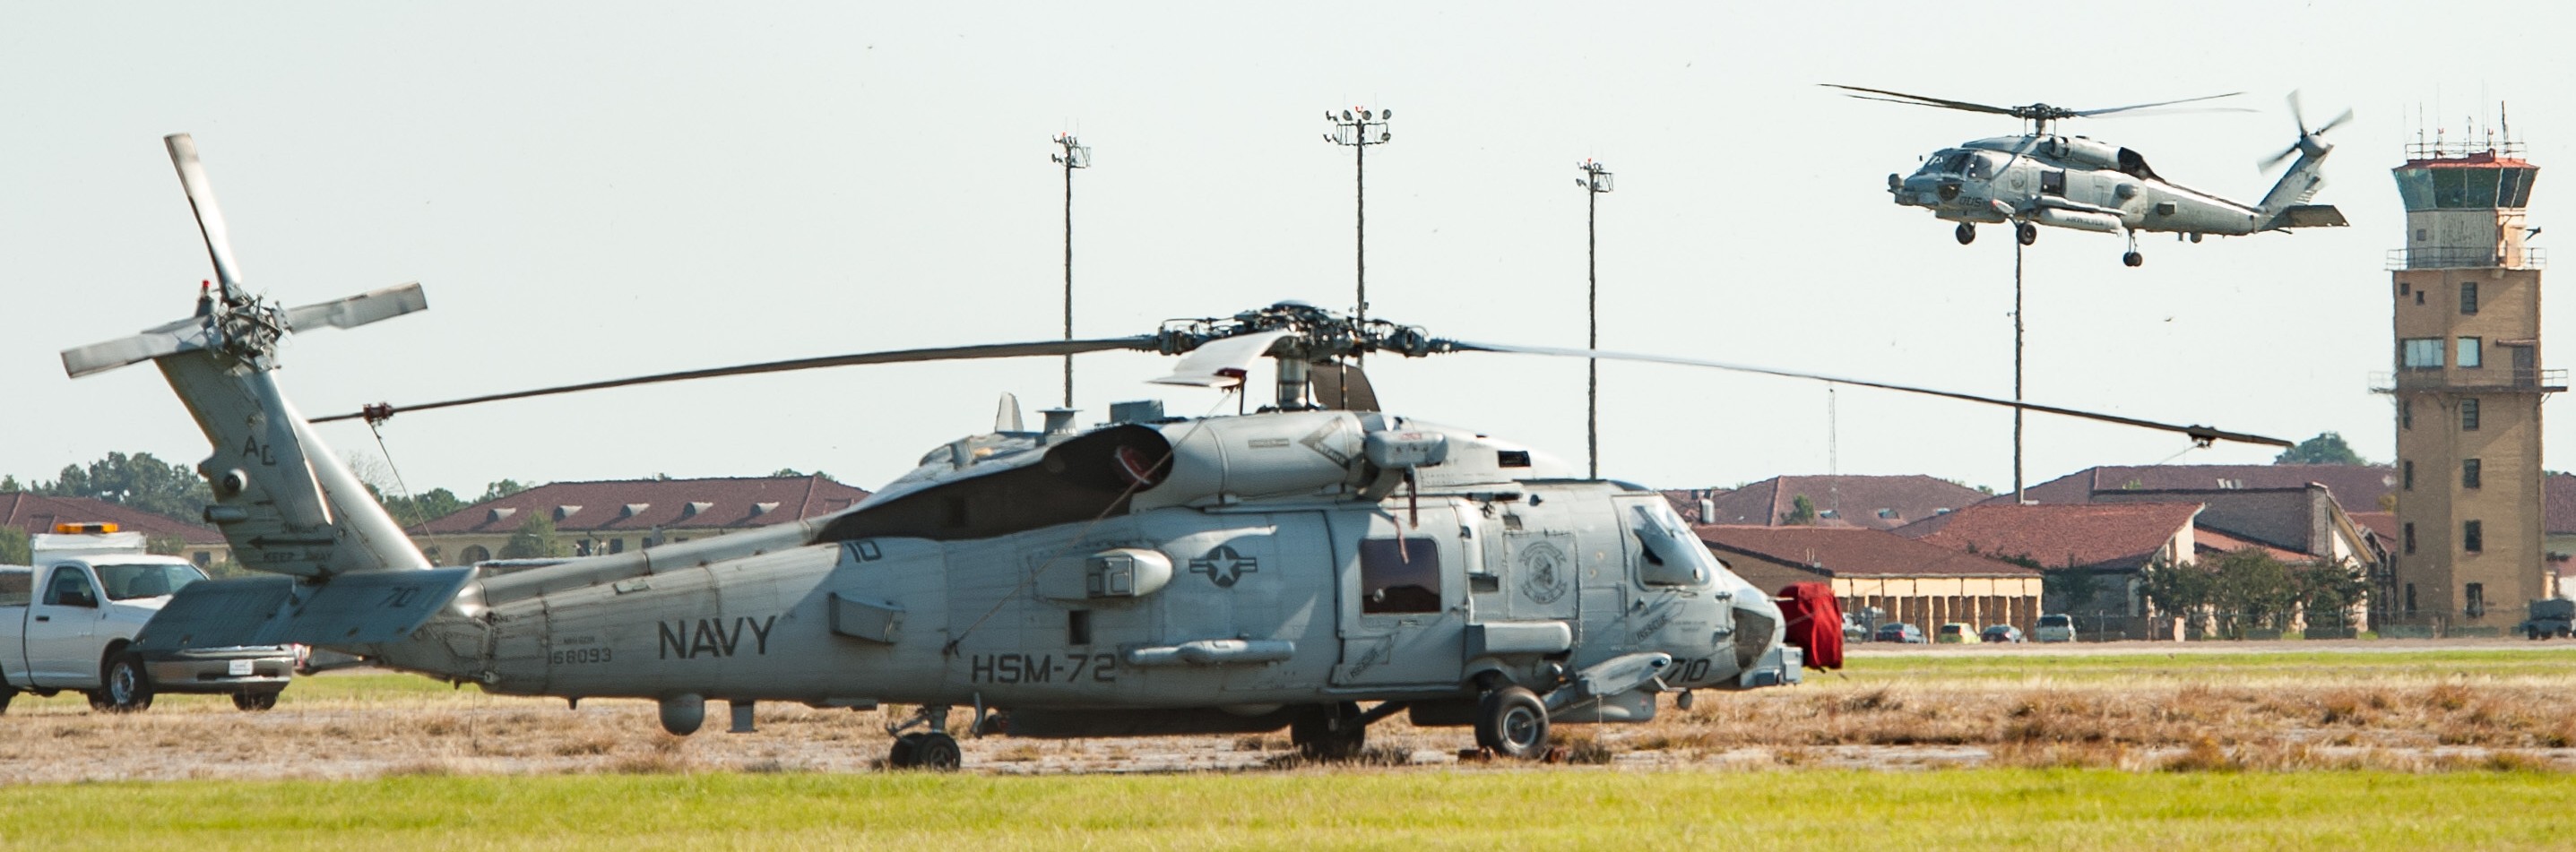 hsm-72 proud warriors helicopter maritime strike squadron mh-60r seahawk maxwell afb alabama 10